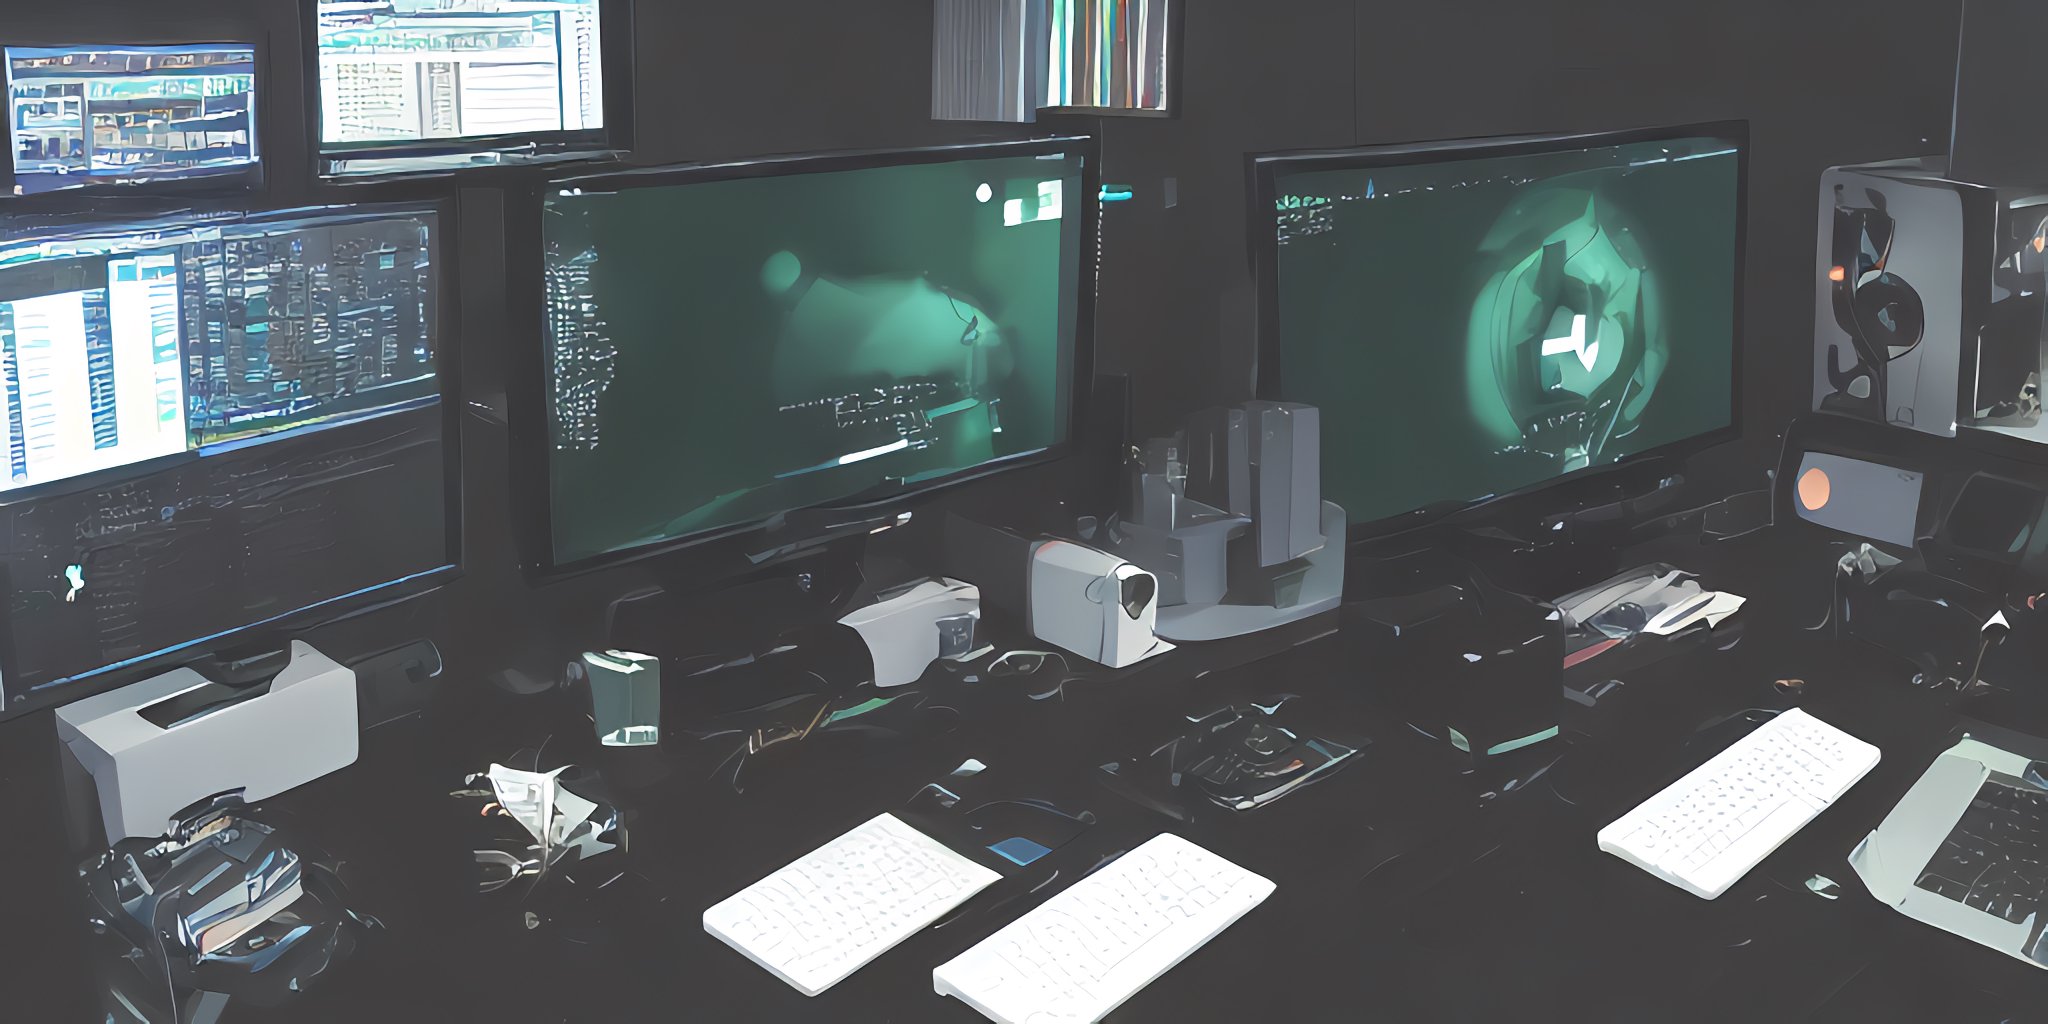 An image of アニメ, hacker's battlestation, desktop computer with three screens, split keyboard, green text on black background, a cup of coffee, Haskell, by greg rutkowski and artgerm